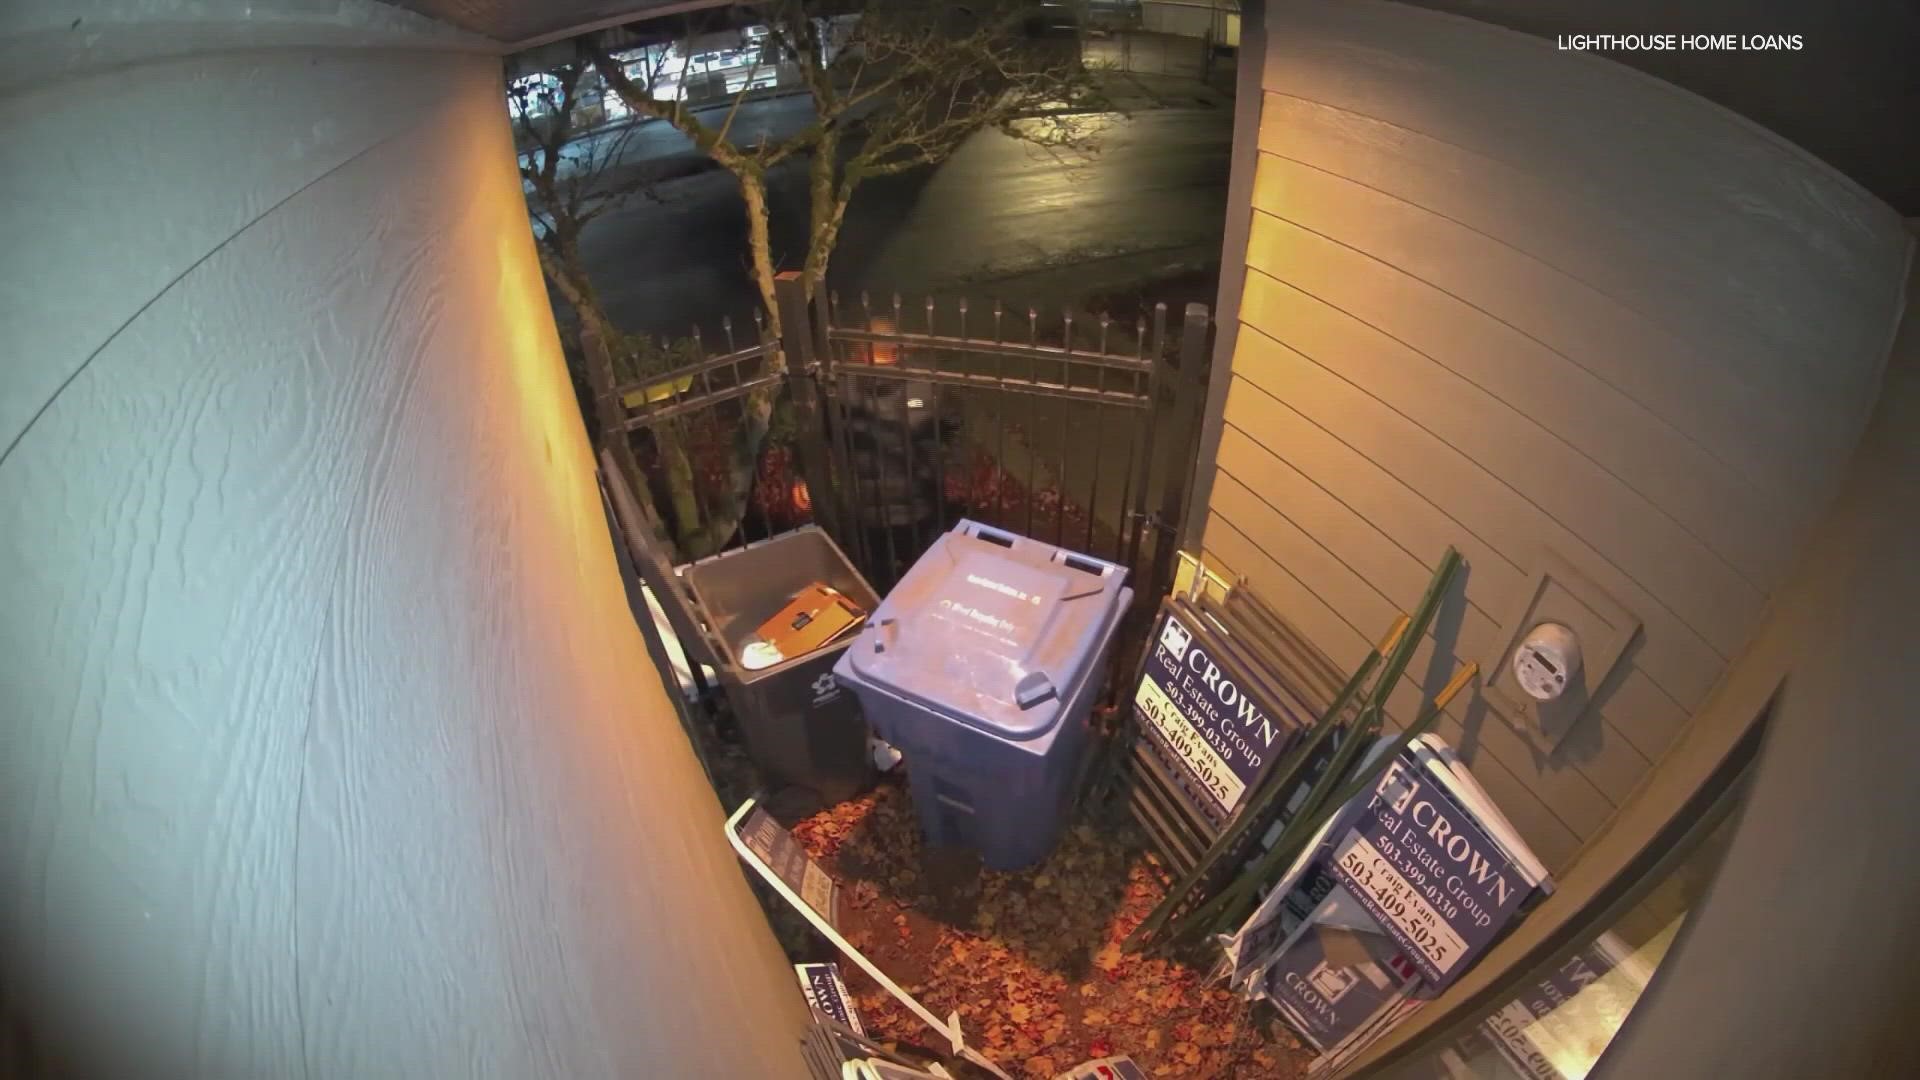 Camera caught someone reaching into a dumpster near Lighthouse Home Loans and lighting cardboard on fire. Minutes later, the flames spread to the building's side.